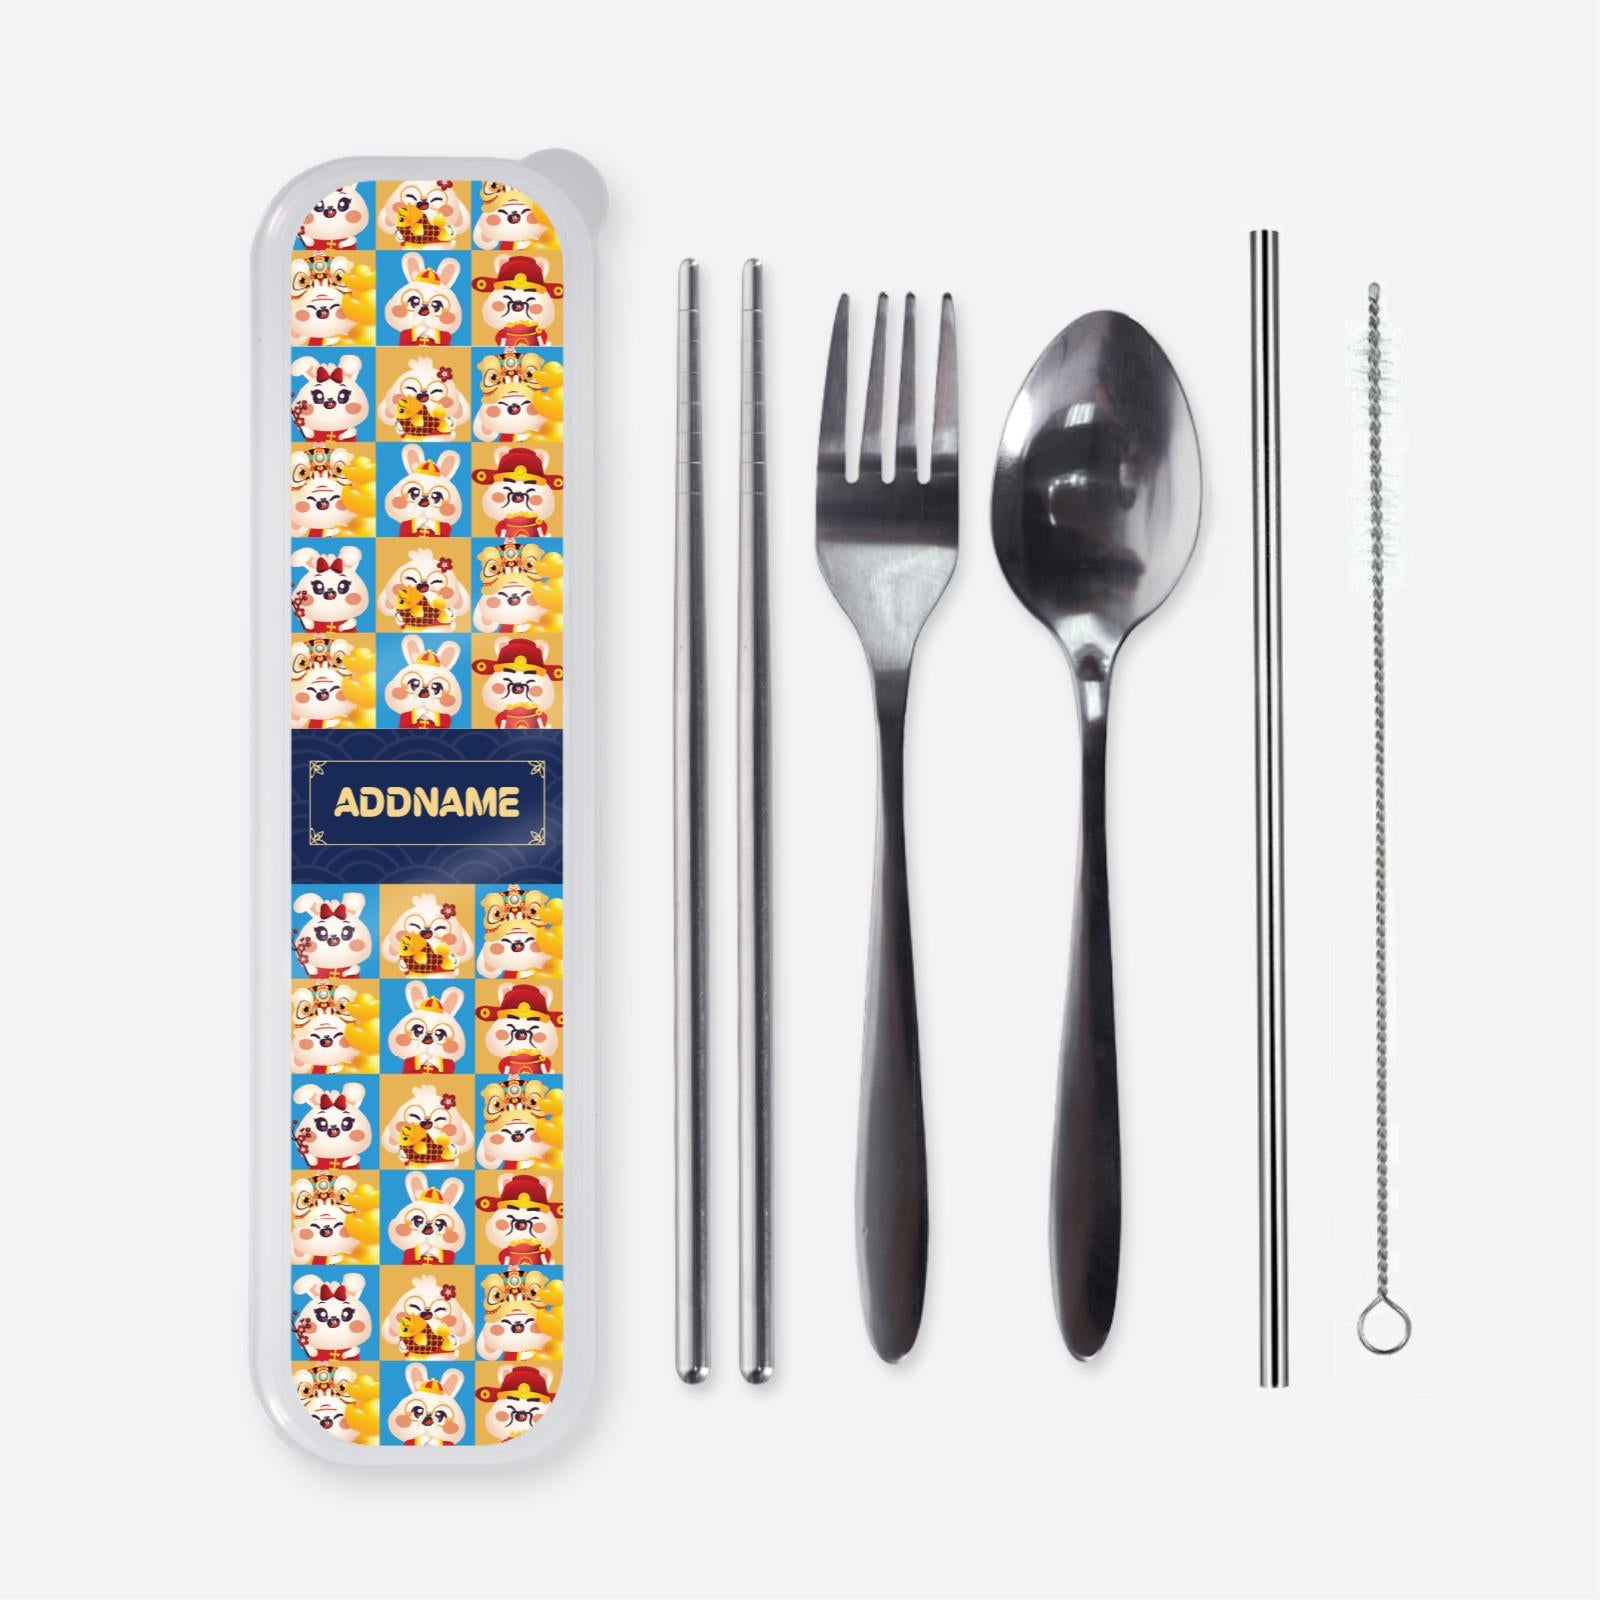 Cny Rabbit Family - Rabbit Family Blue Cutlery With English Personalization